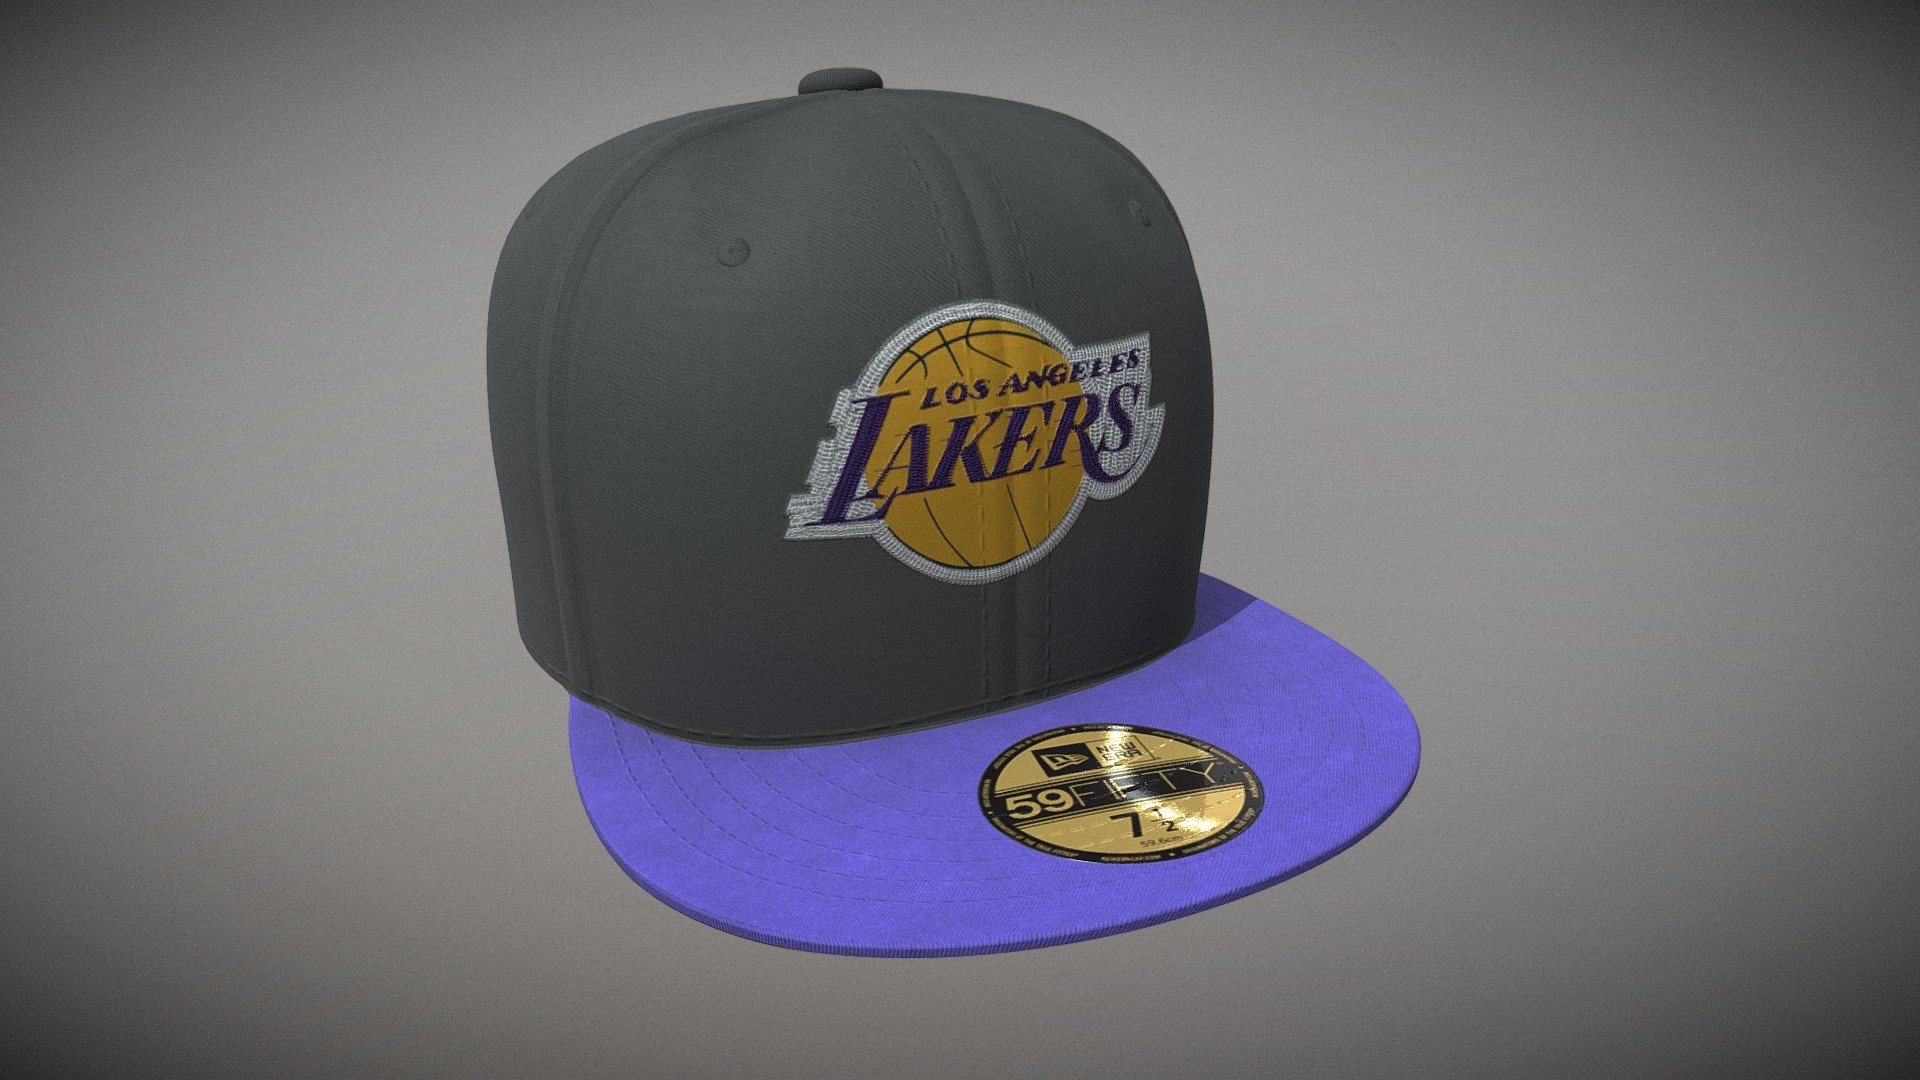 Baseball cap.
Los Angeles Lakers

Optimized for the AR and game.
Mesh - Low poly - Baseball cap - Buy Royalty Free 3D model by WAM3D 3d model